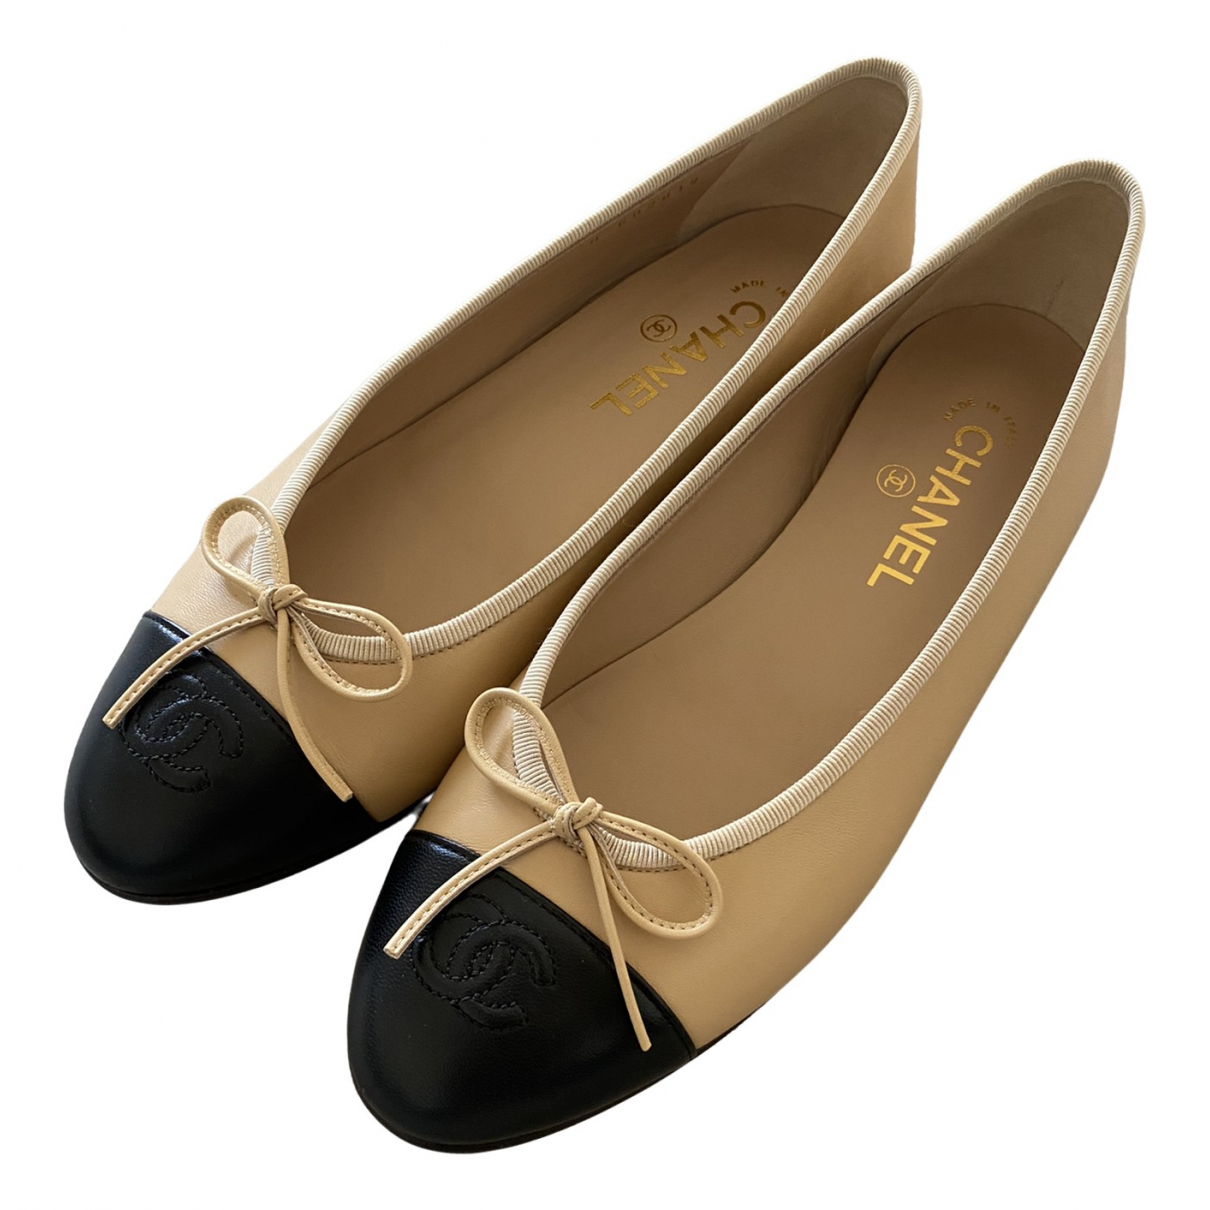 Max 84% OFF Cambon leather ballet Max 52% OFF flats